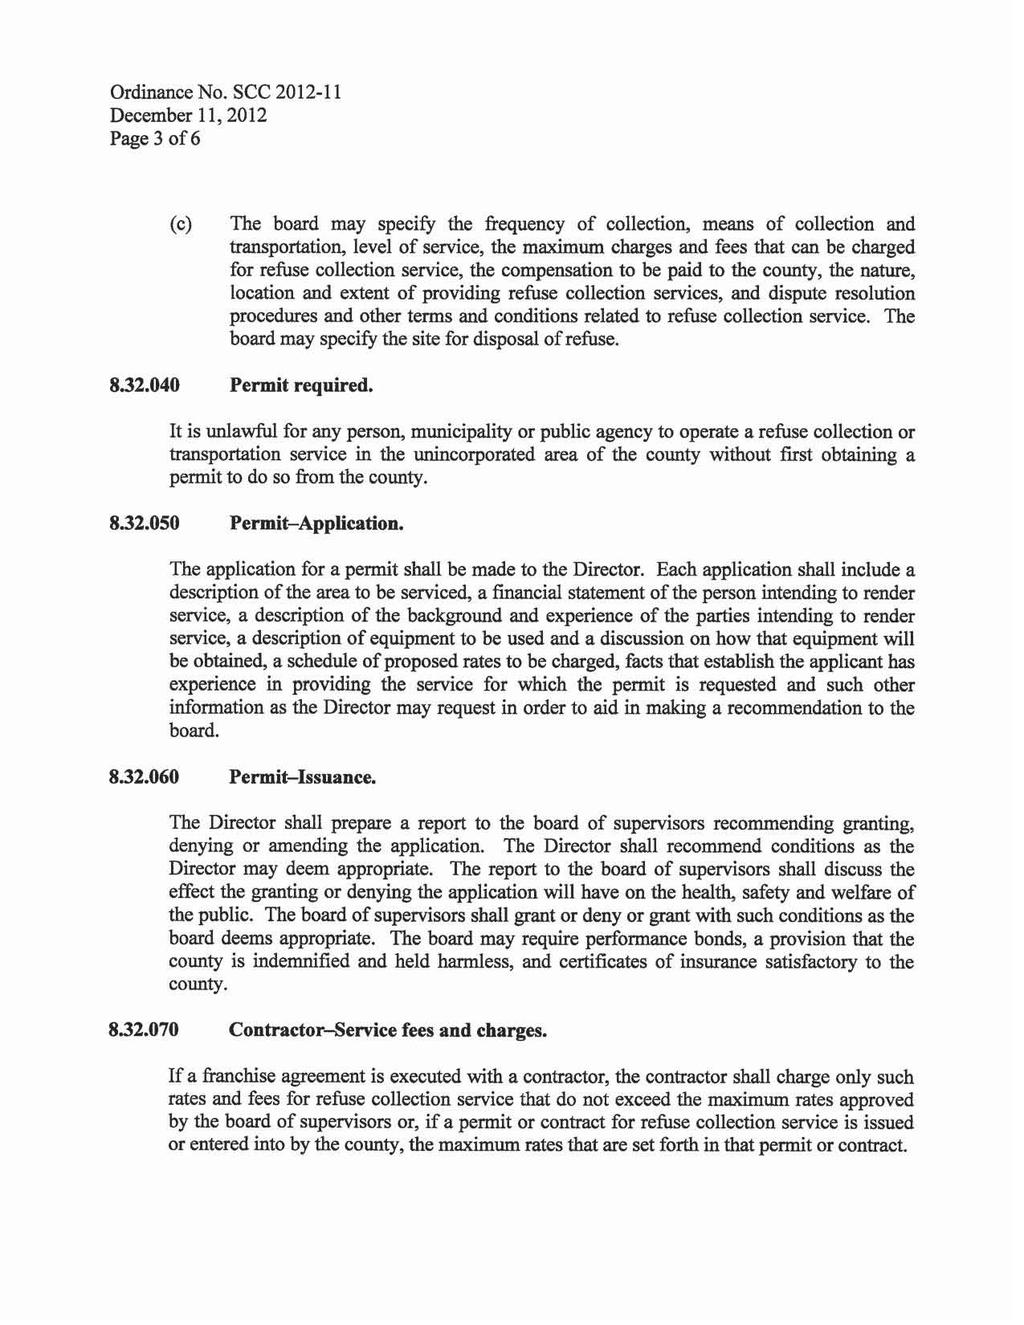 Ordinance No. see 2012-11 December 11, 2012 Page 3 of6 832.